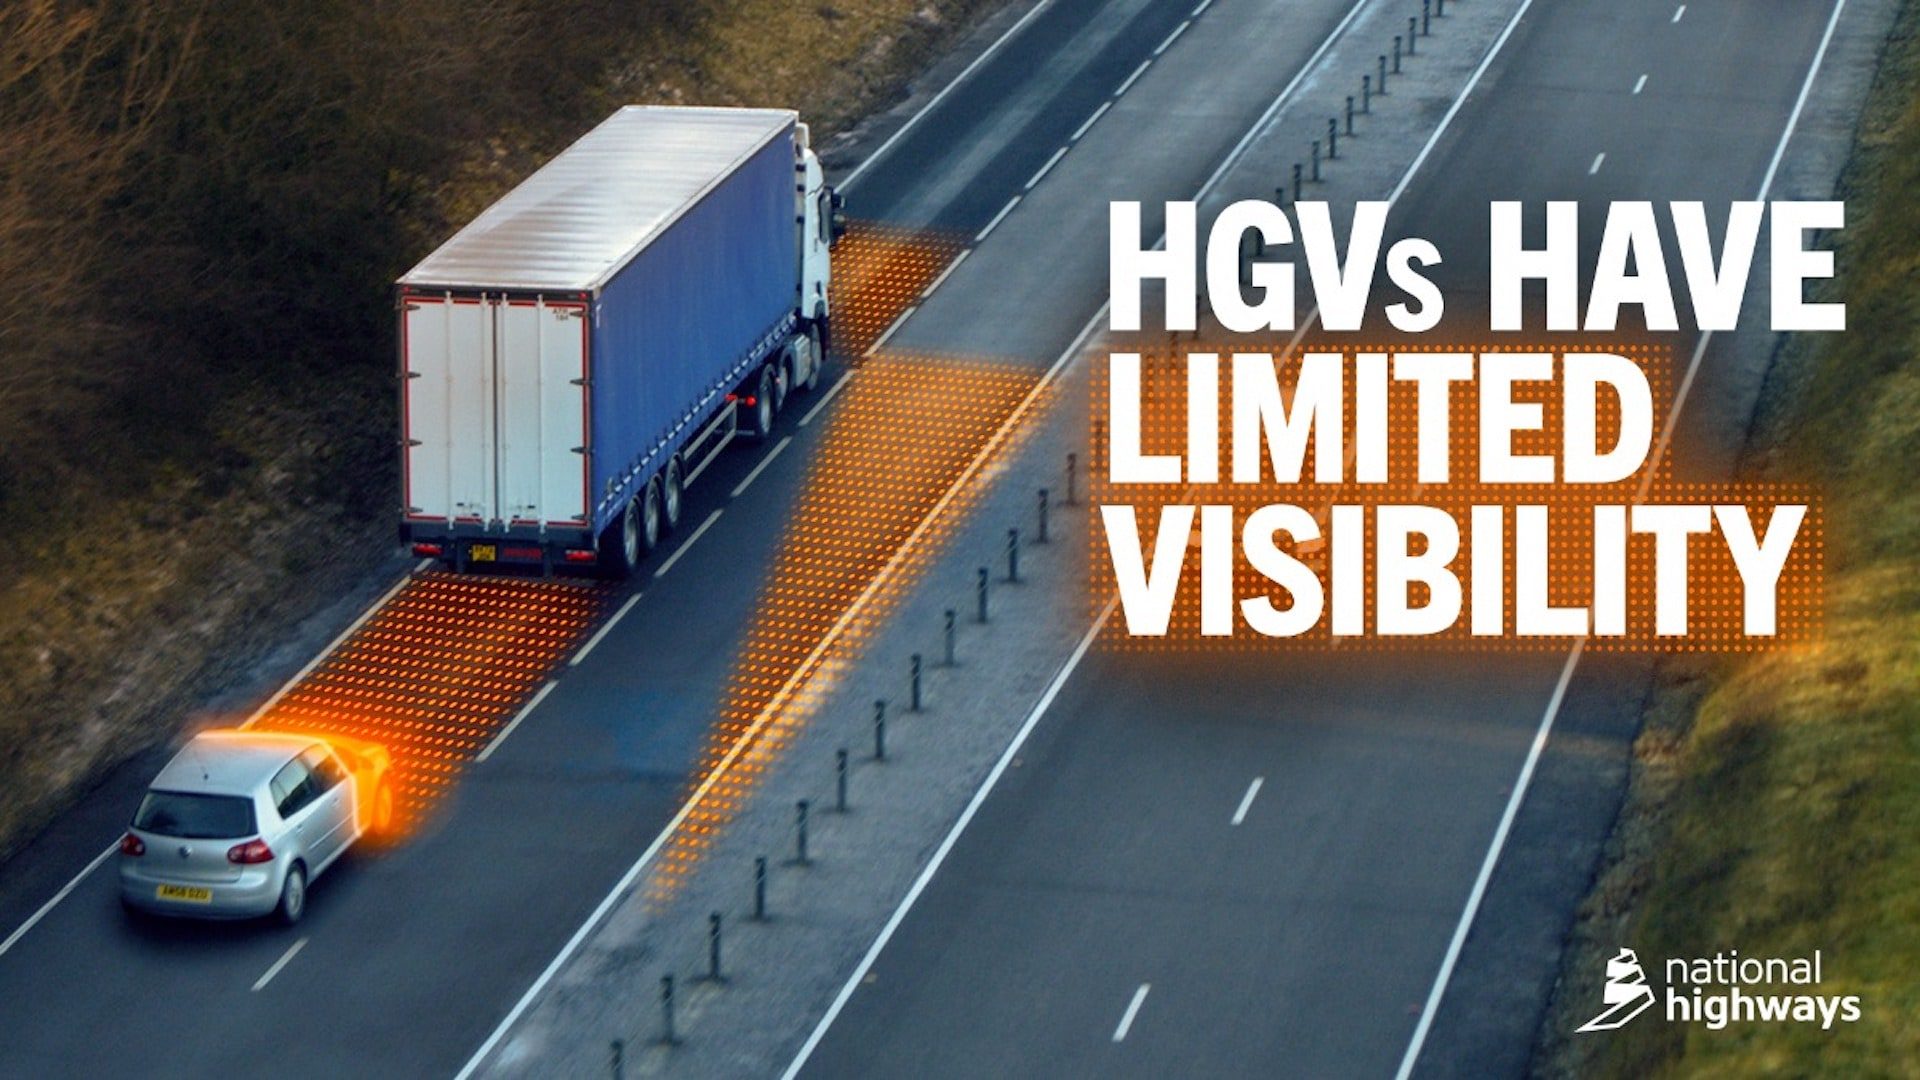 National Highway HGV Safety Campaign